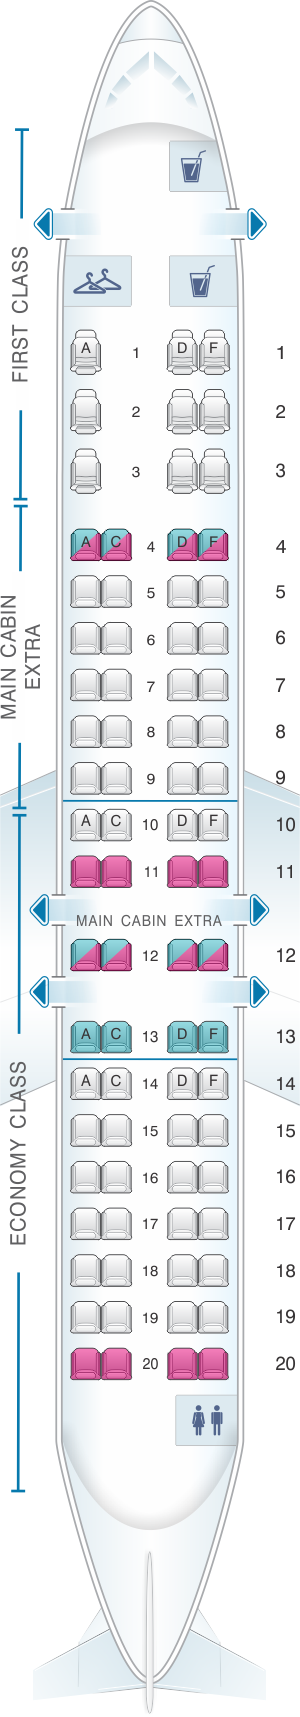 Canadair Regional Jet 900 Seating Chart American Airlines ...